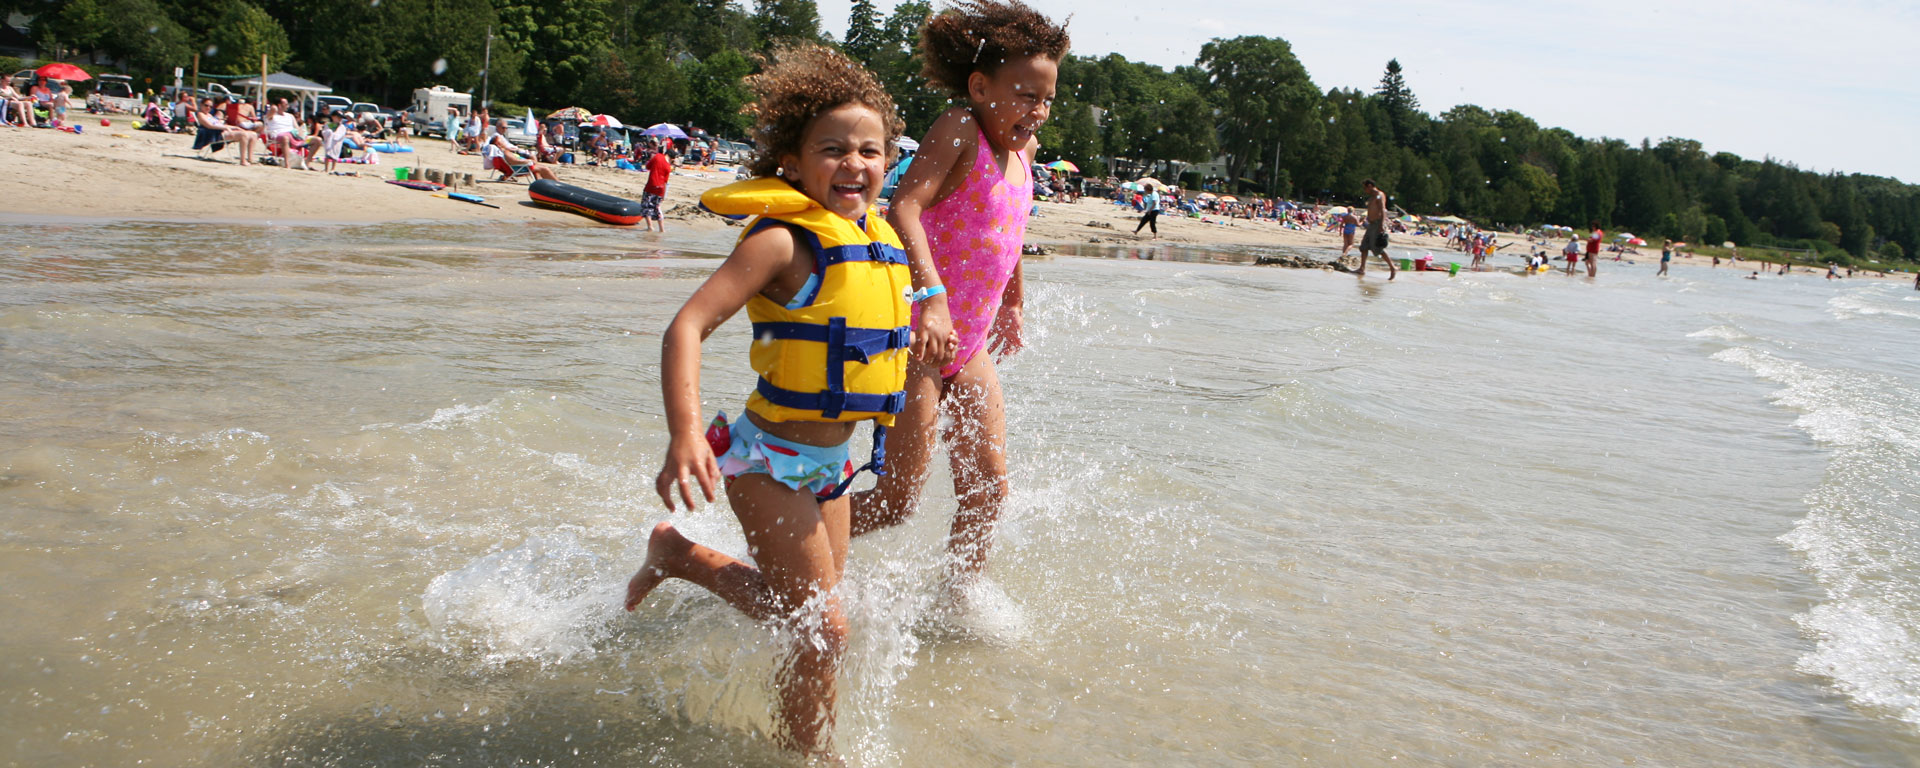 two kids, one in pink the other in a yellow lifejacket splashing and running into the water